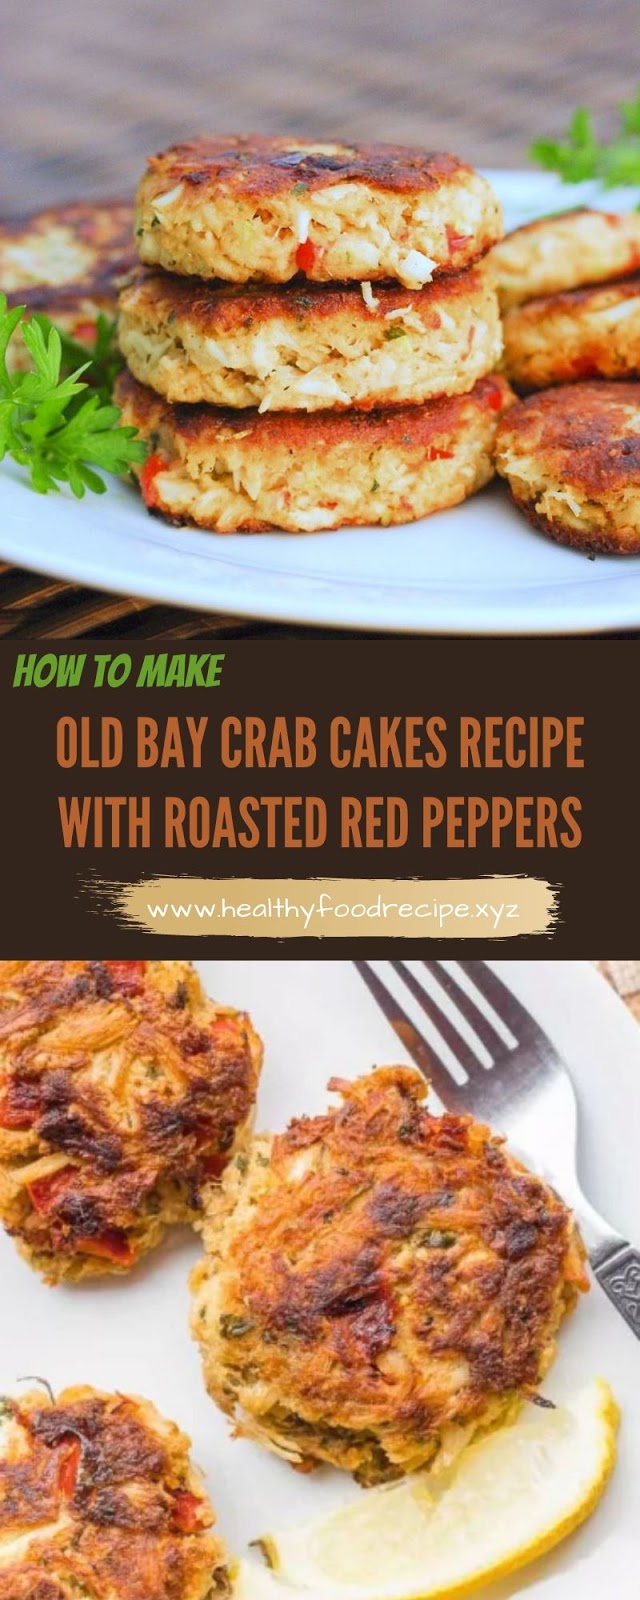 OLD BAY CRAB CAKES RECIPE WITH ROASTED RED PEPPERS